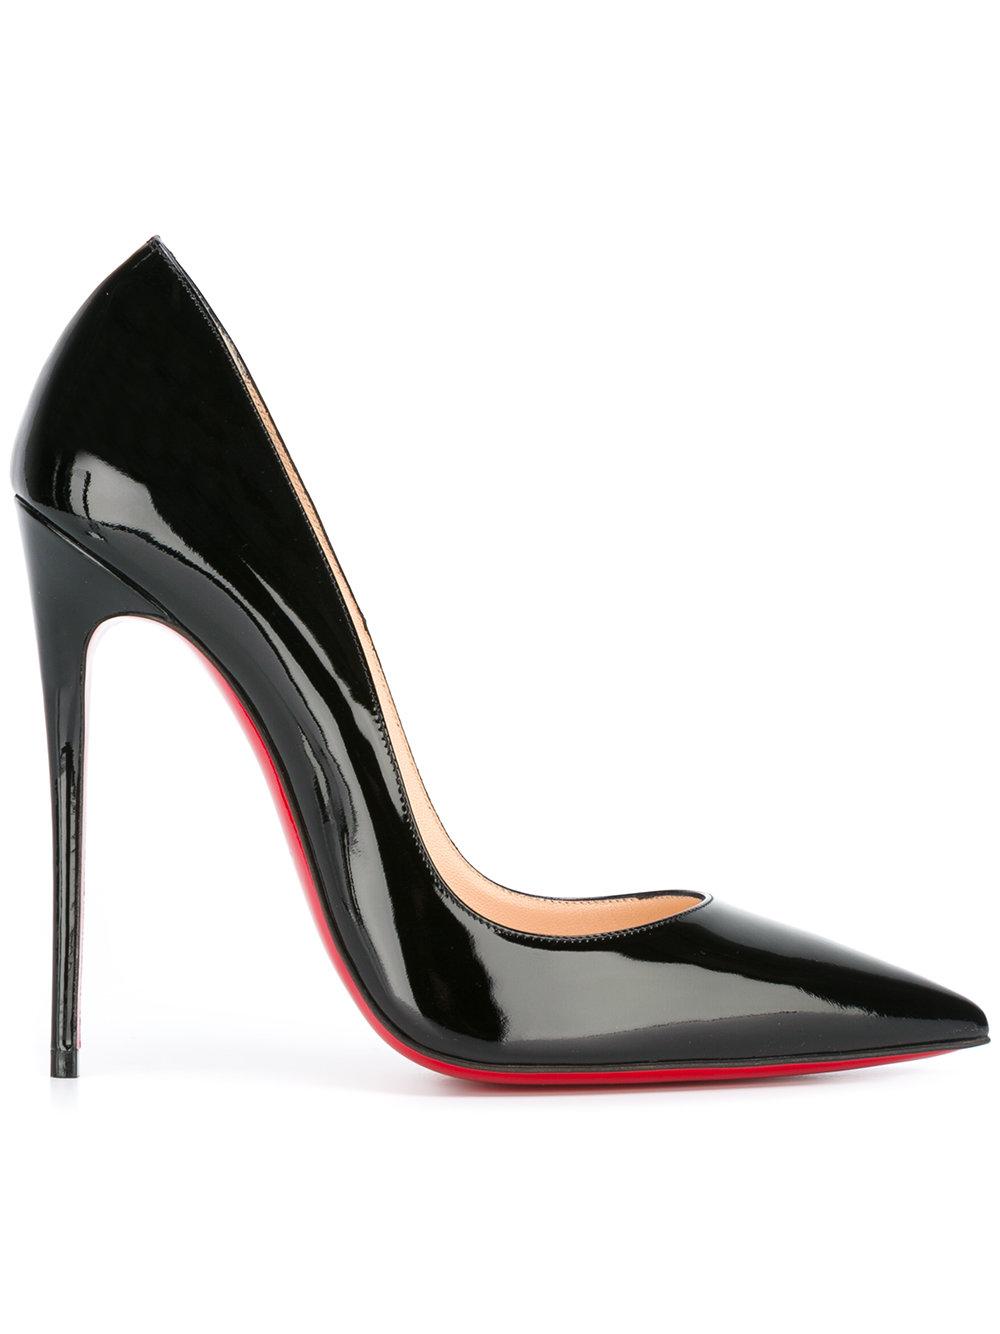 Christian louboutin Stiletto Heel Pointed Toe Classic Pump in Black | Lyst